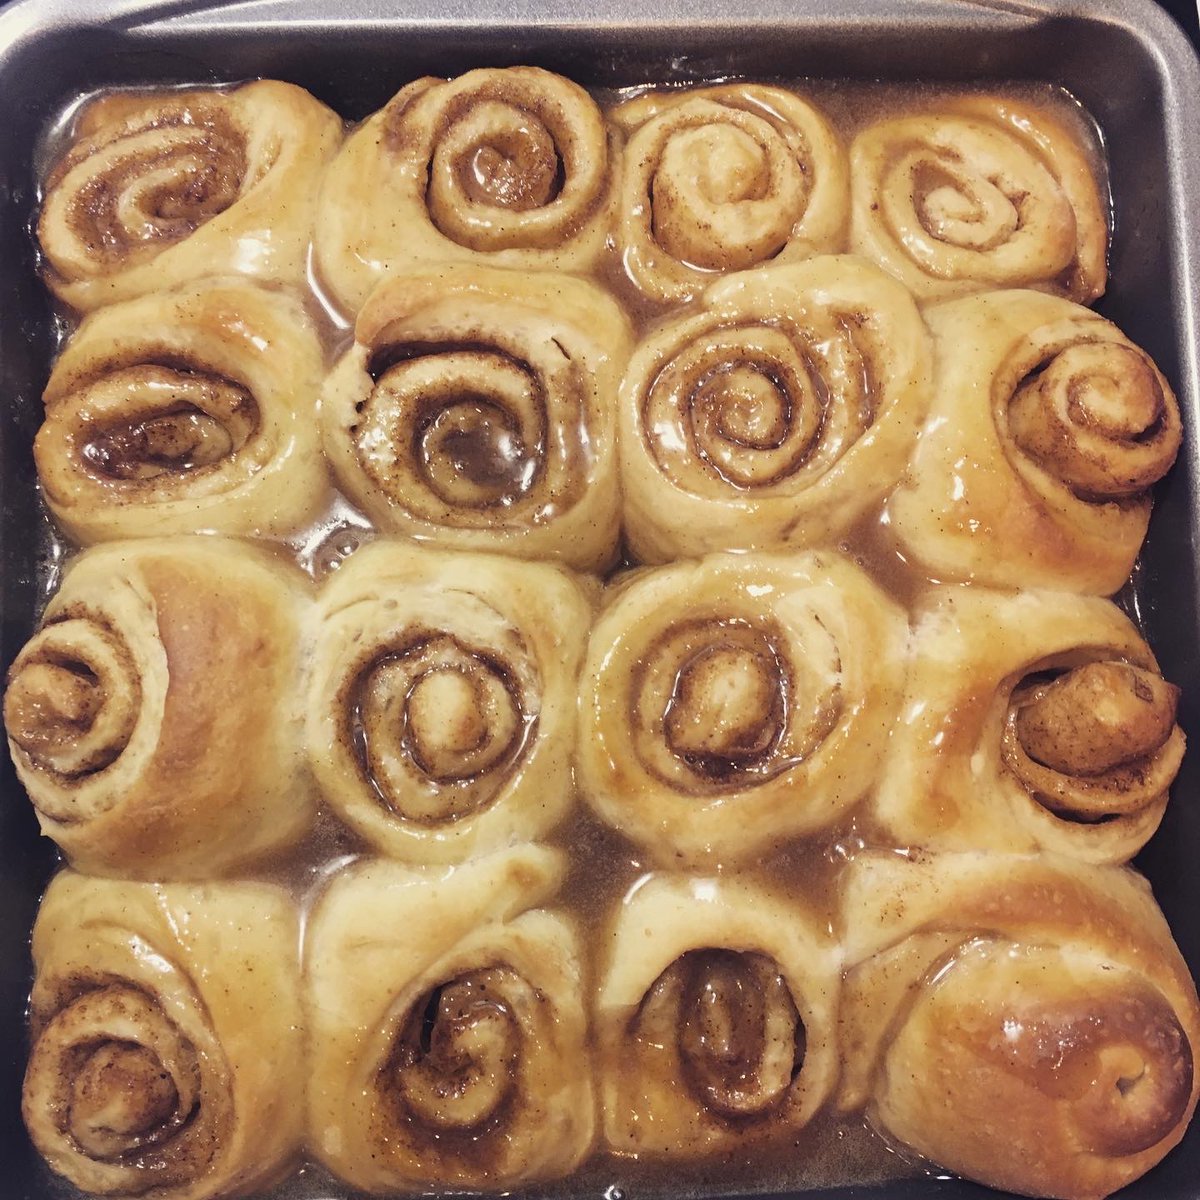 I’m lowkey loving juxtaposing cute mirror selfies and baked goods from the weekend. This time, baby butterscotch cinnamon rolls!